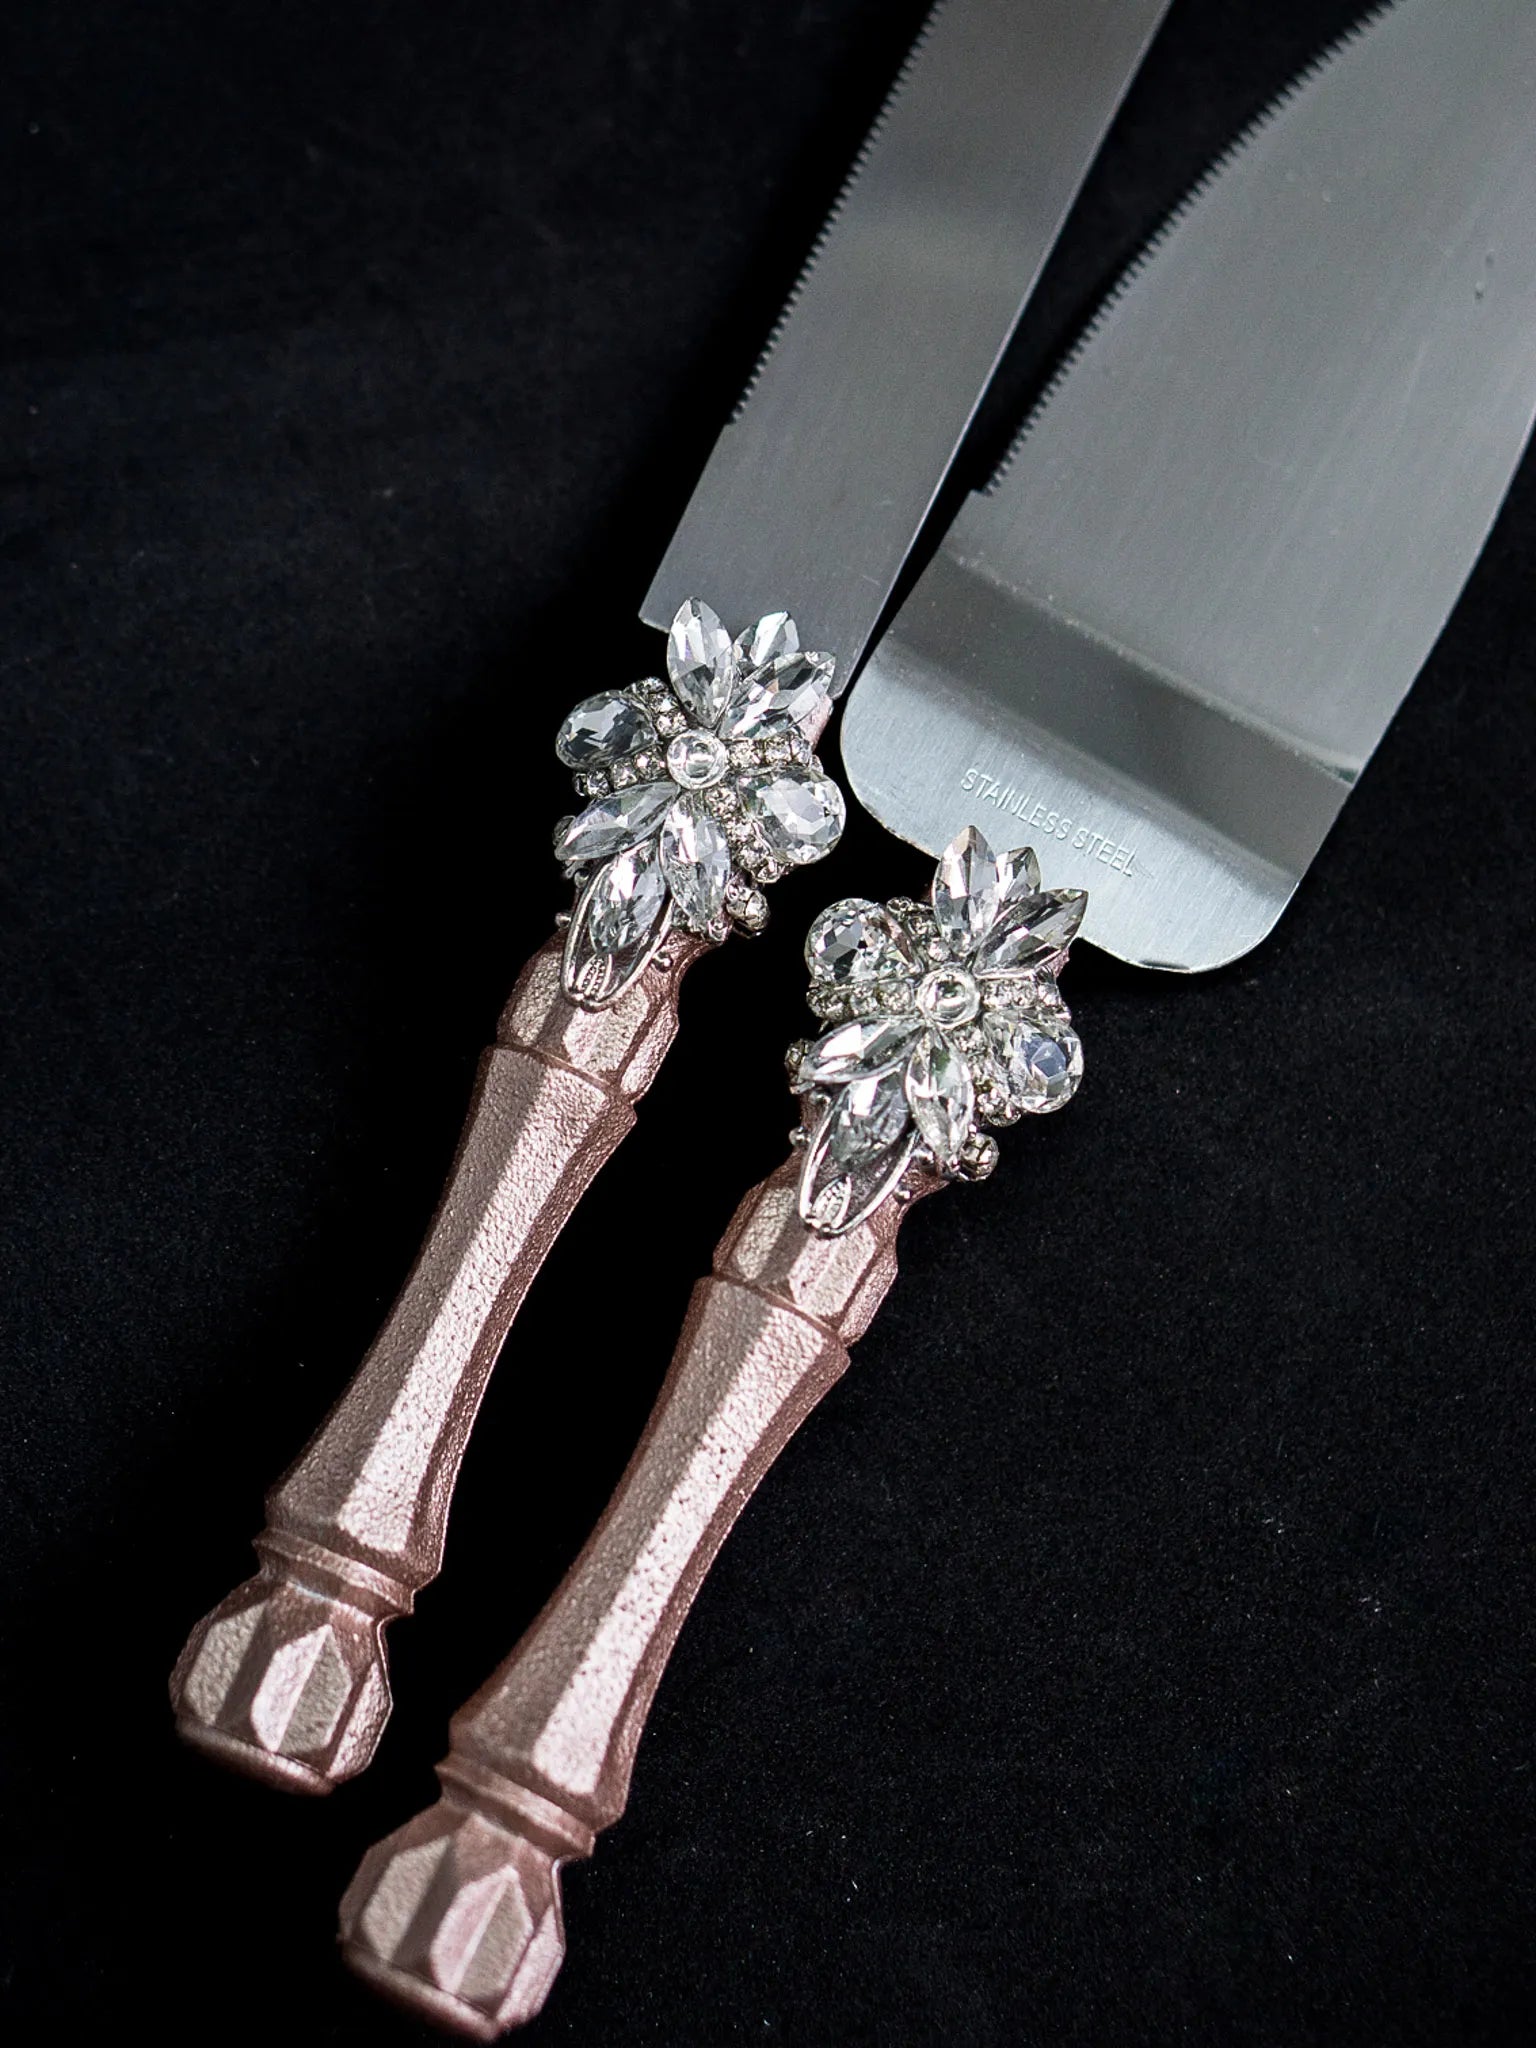 Personalized wedding cake server and knife